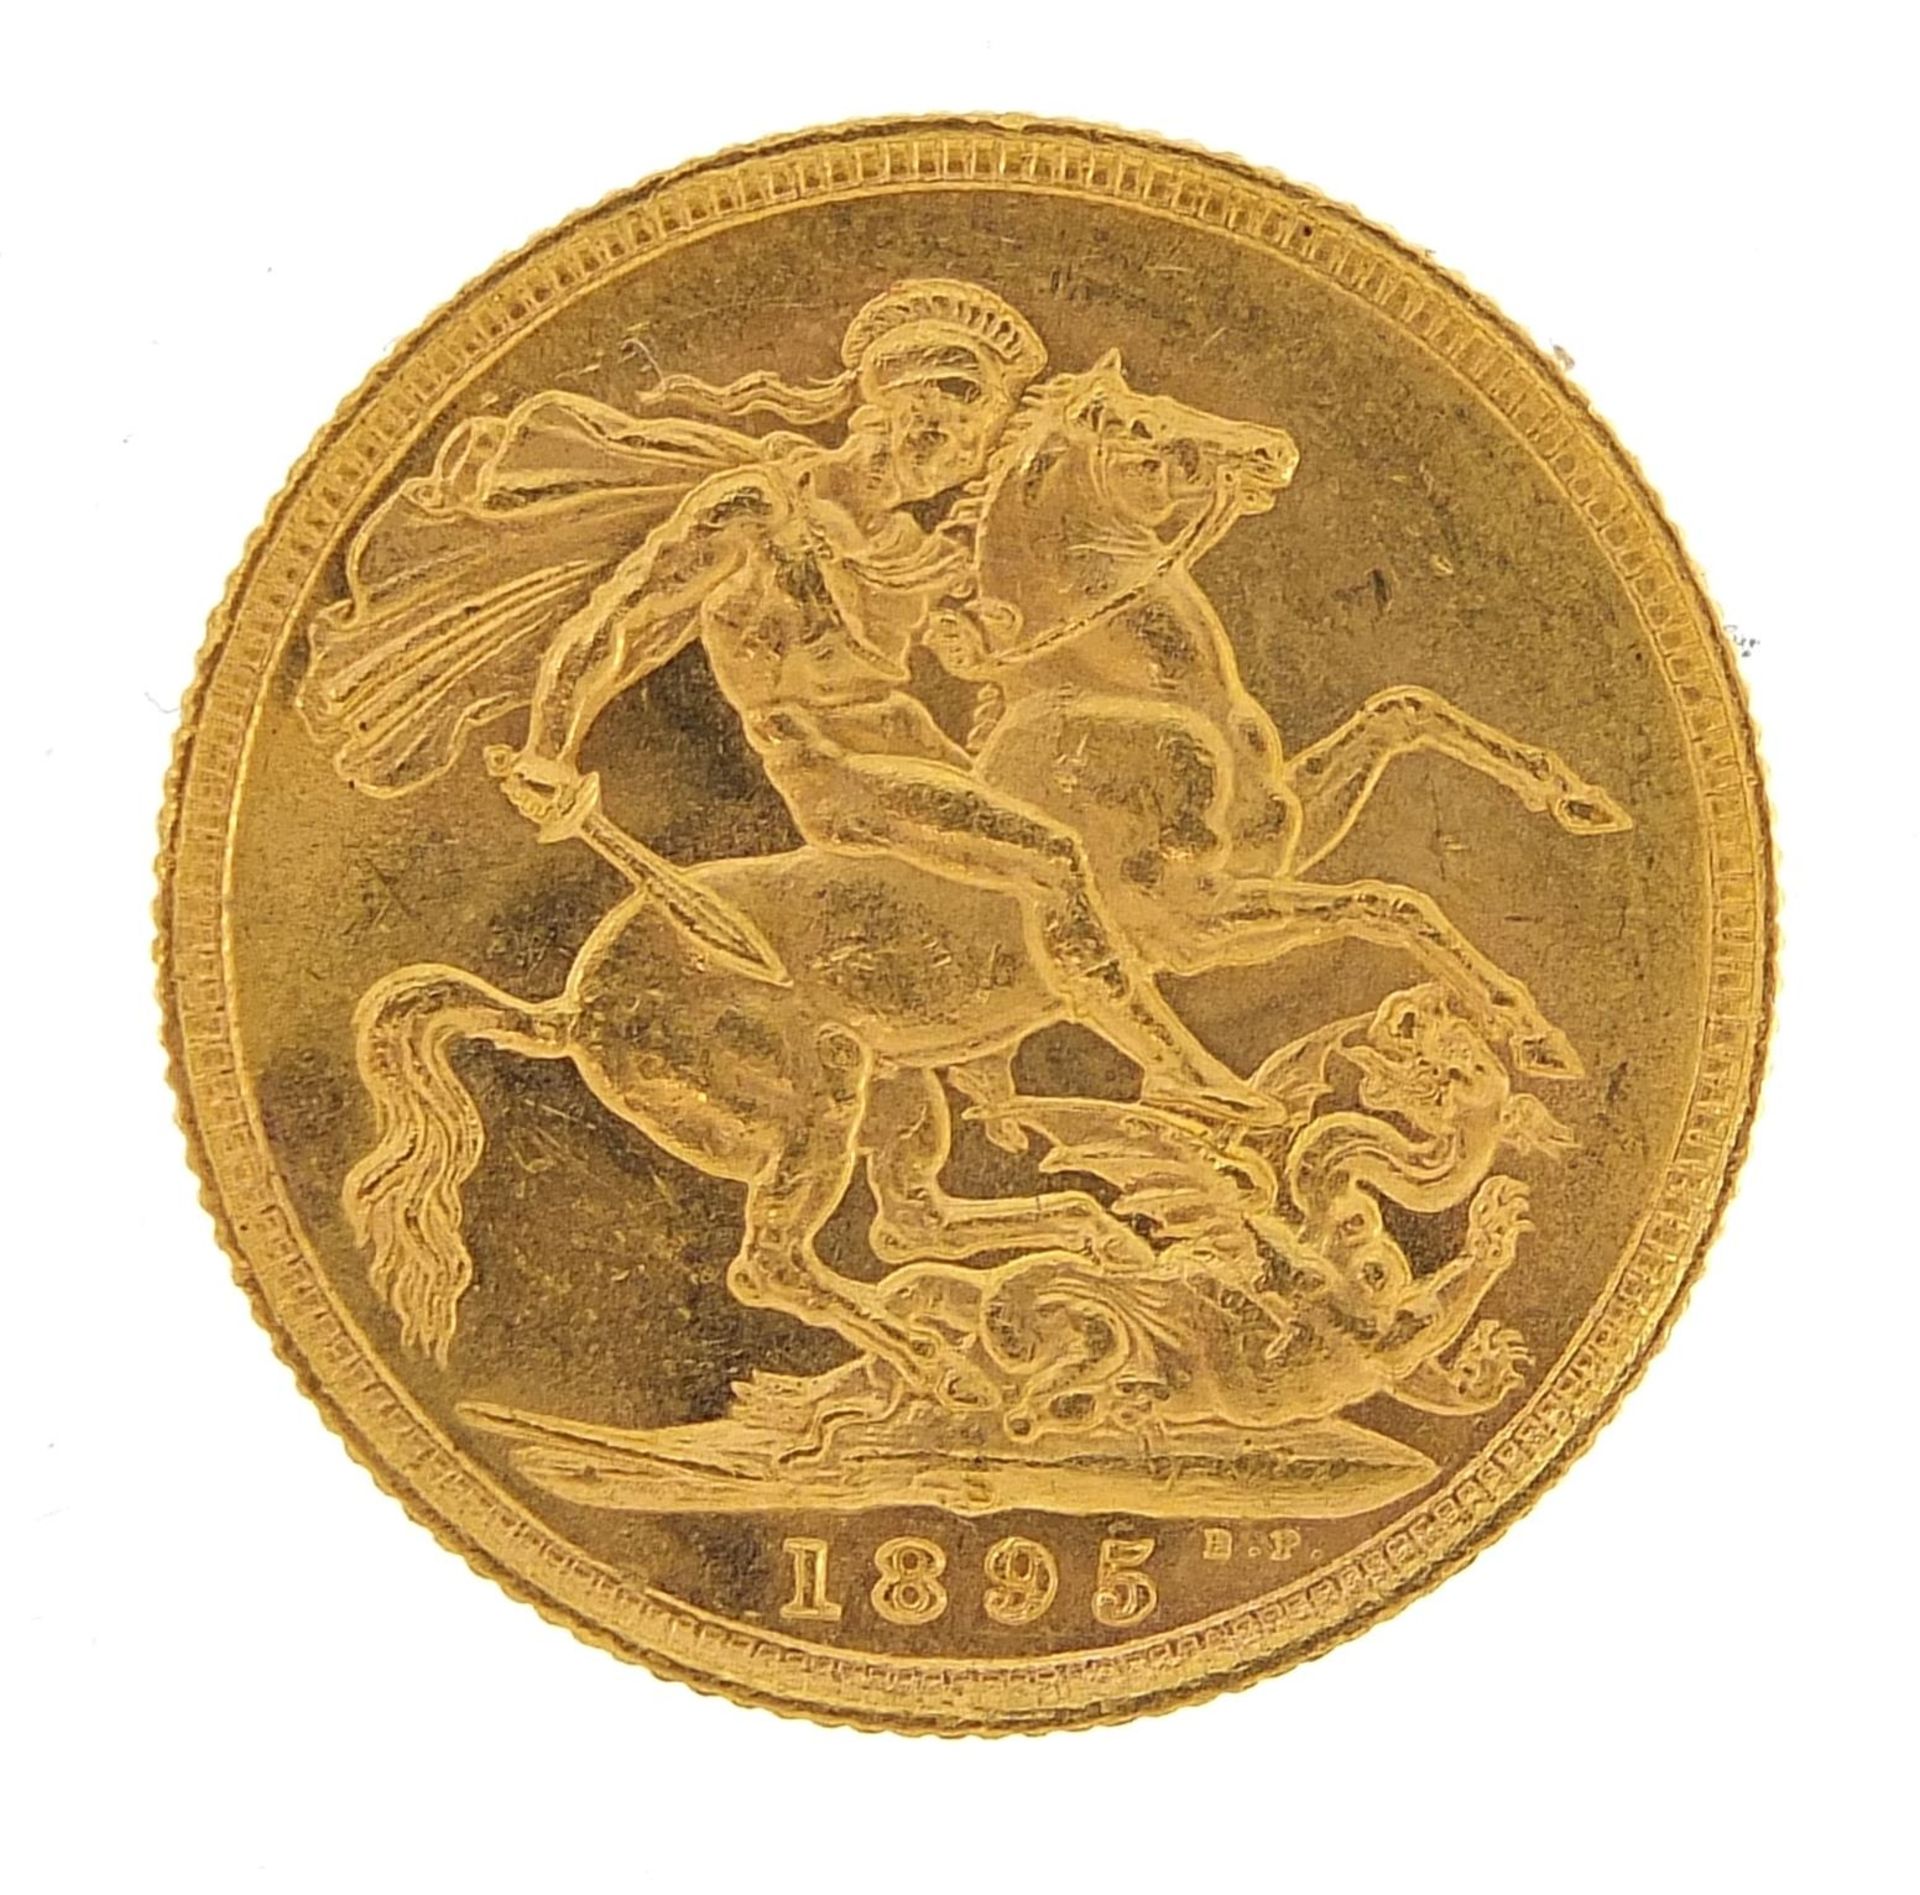 Queen Victoria 1895 gold sovereign, Sydney mint - this lot is sold without buyer's premium